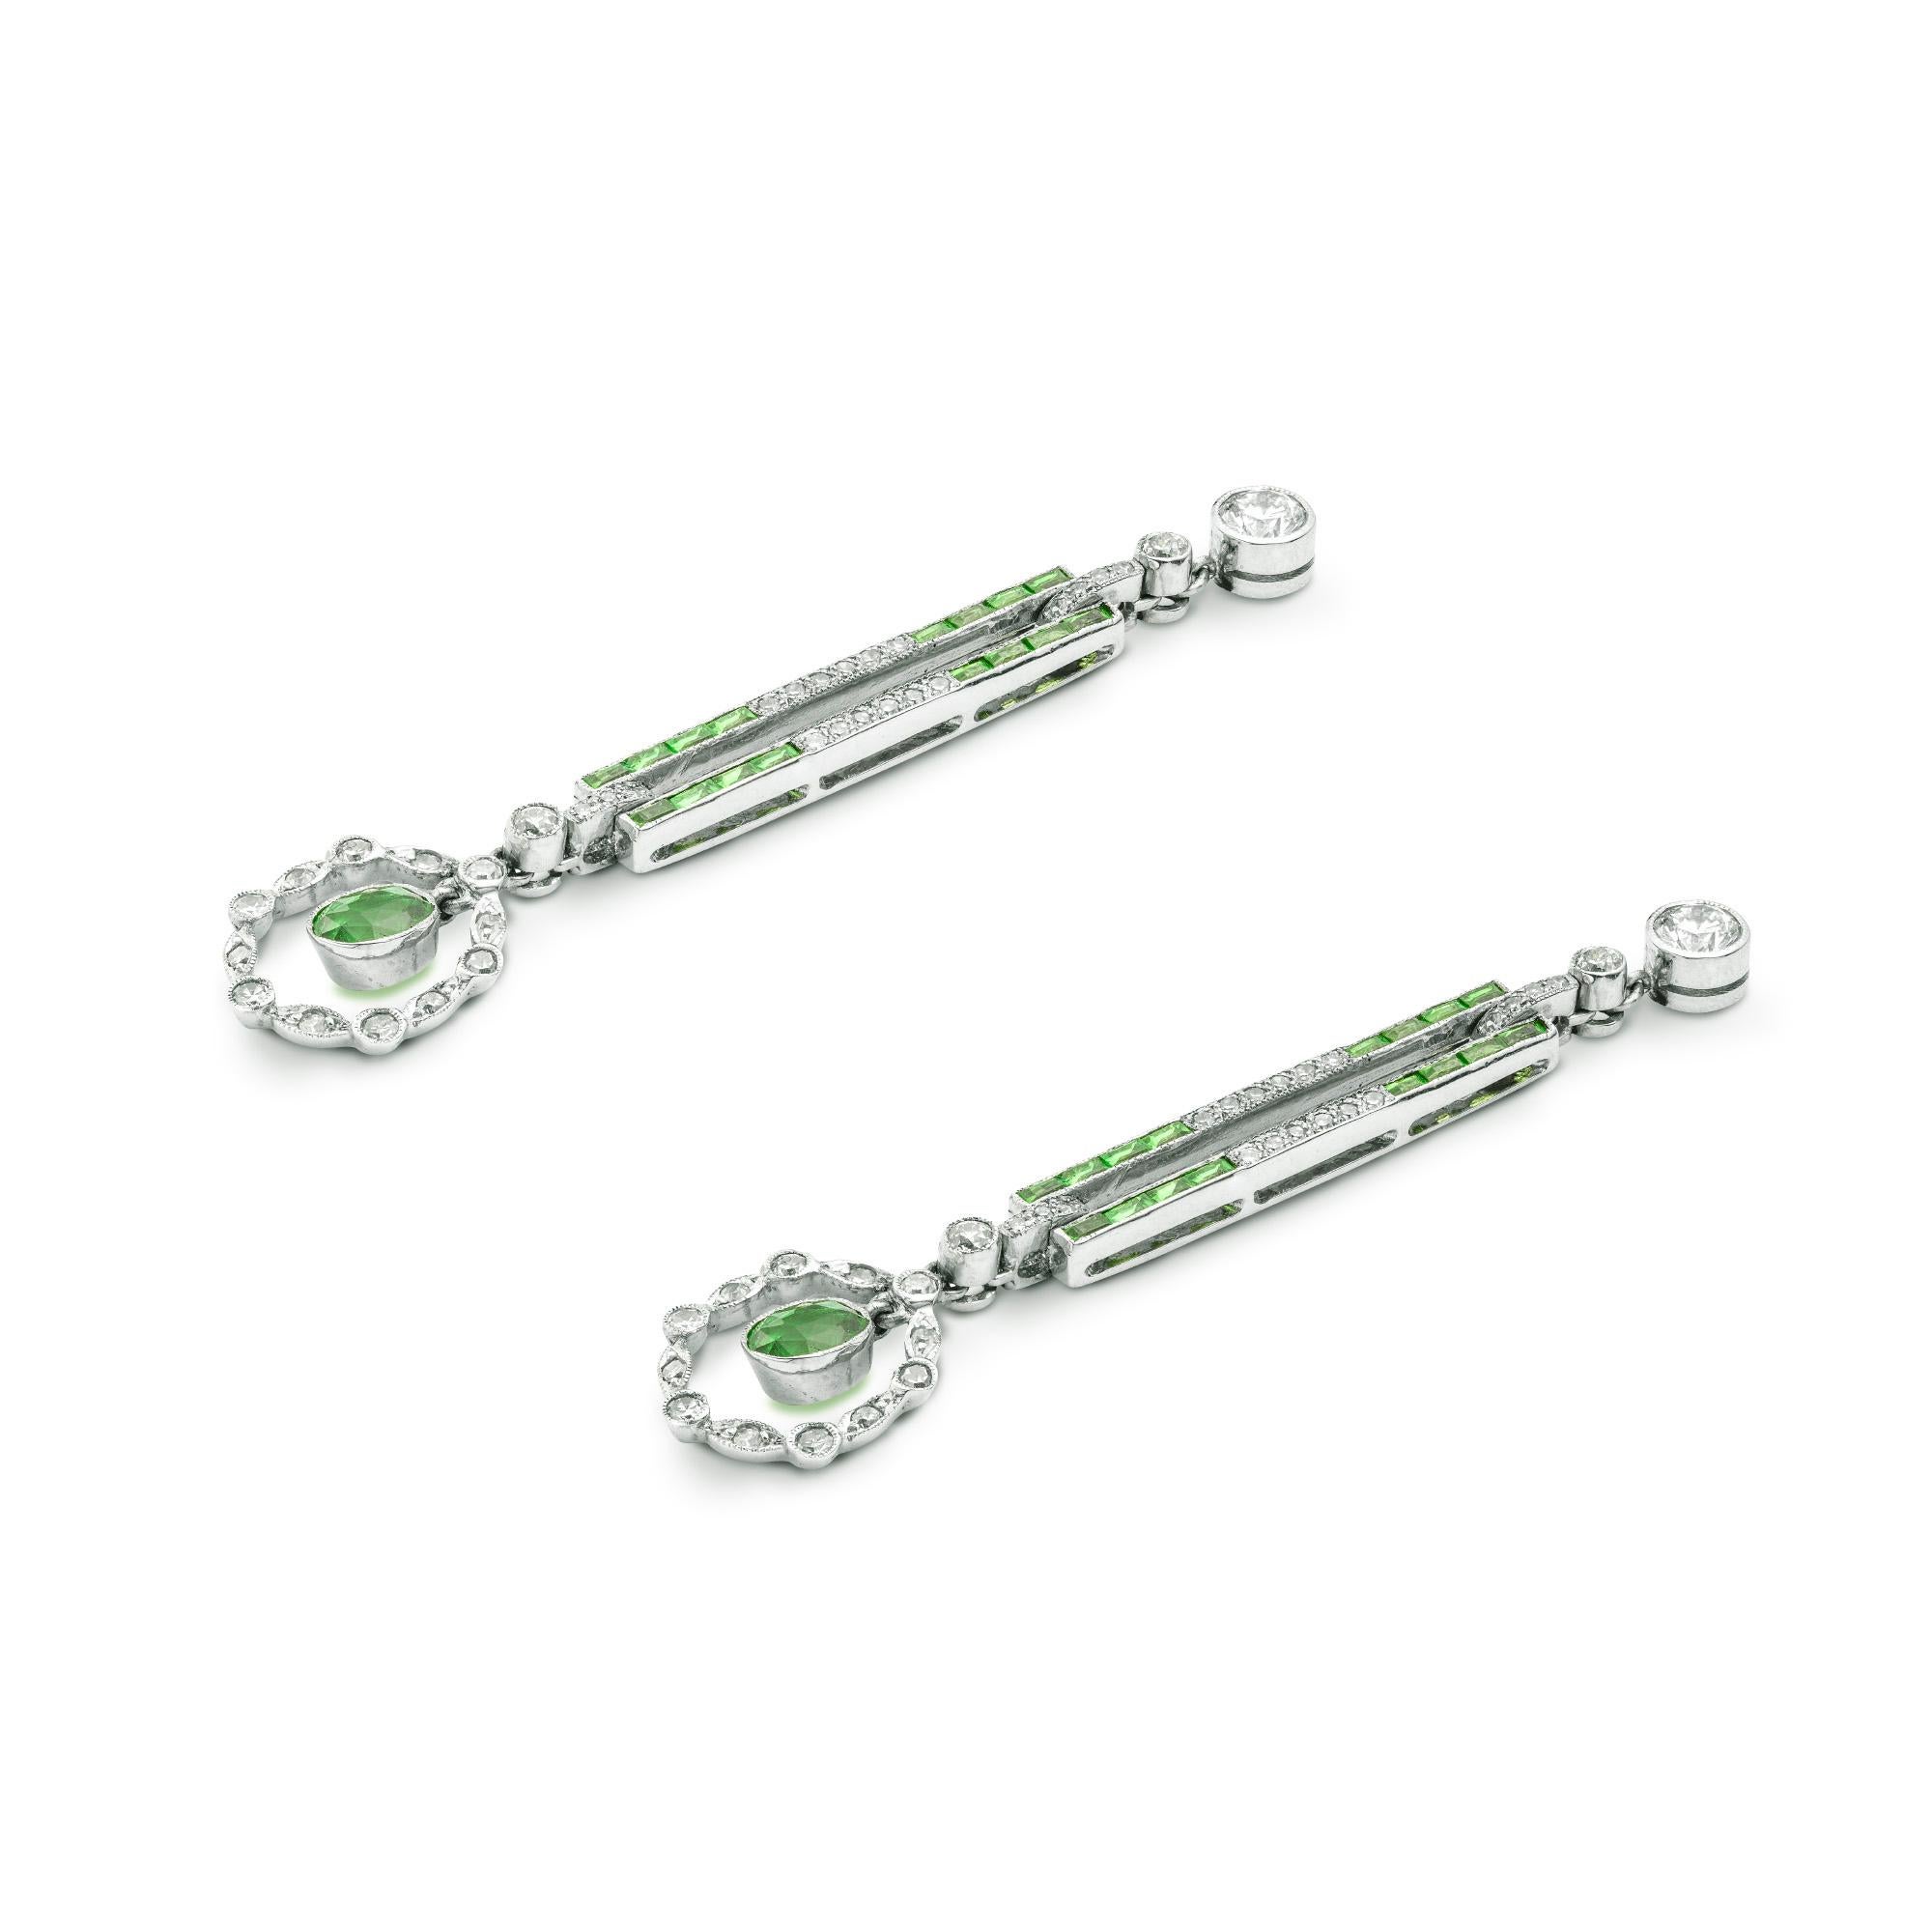 A pair of demantoid garnet and diamond drop earrings, each earring with an oval-cut demantoid-garnet surrounded by a flexible diamond-set cluster, suspended by rectangular centrally-open link, set with calibre-cut demantoid garnets and diamonds, the